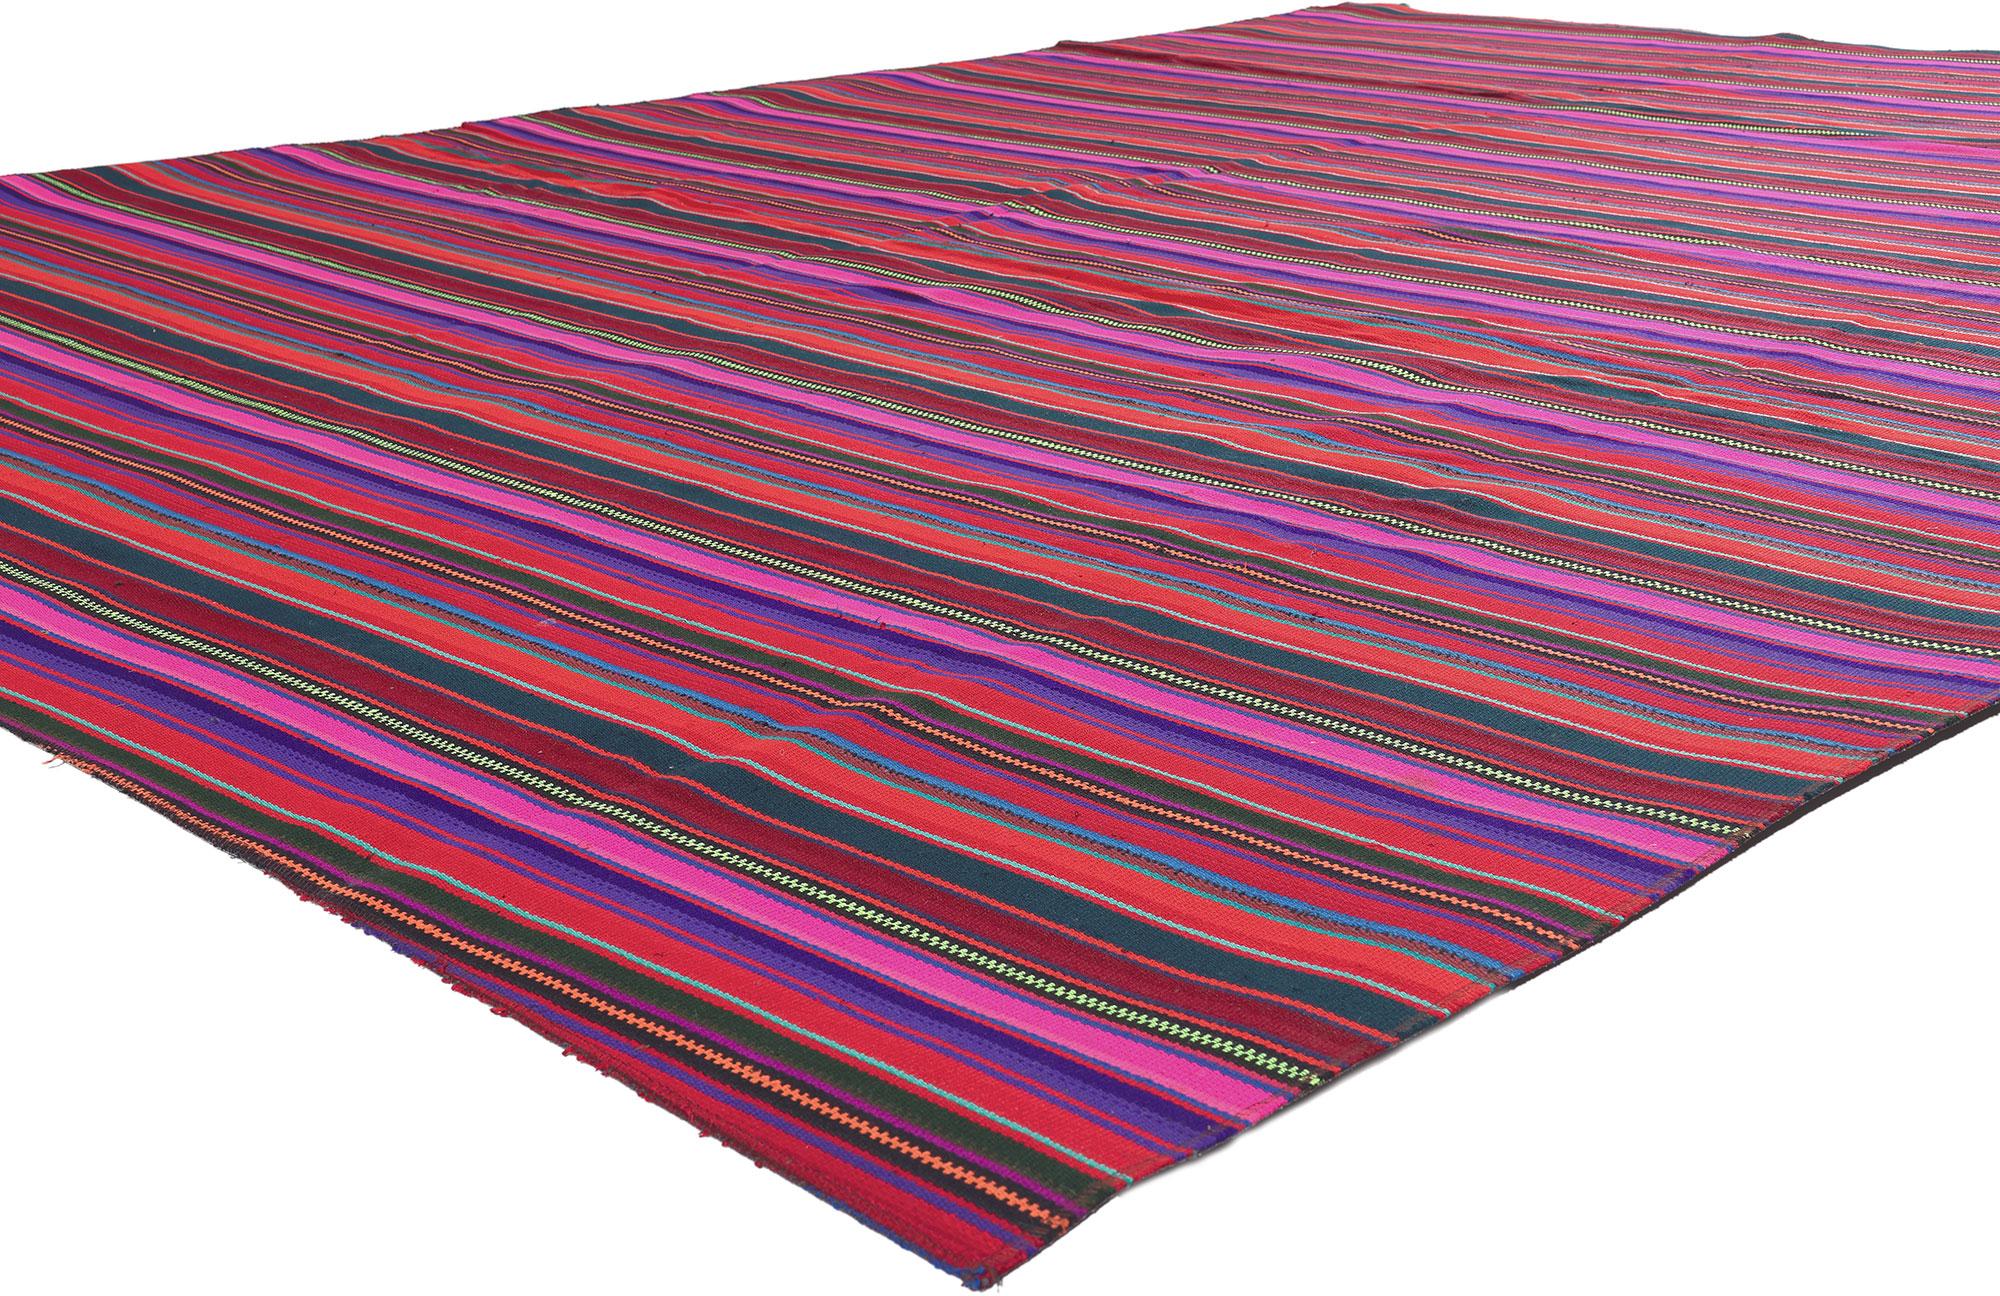 60798 Vintage Turkish Striped Kilim Rug, 08'06 x 11'07. Transcending the ordinary, Bayadere-patterned maximalist interiors possess an ageless allure. This lively stripe pattern, embraced by diverse design movements, has spawned a multitude of